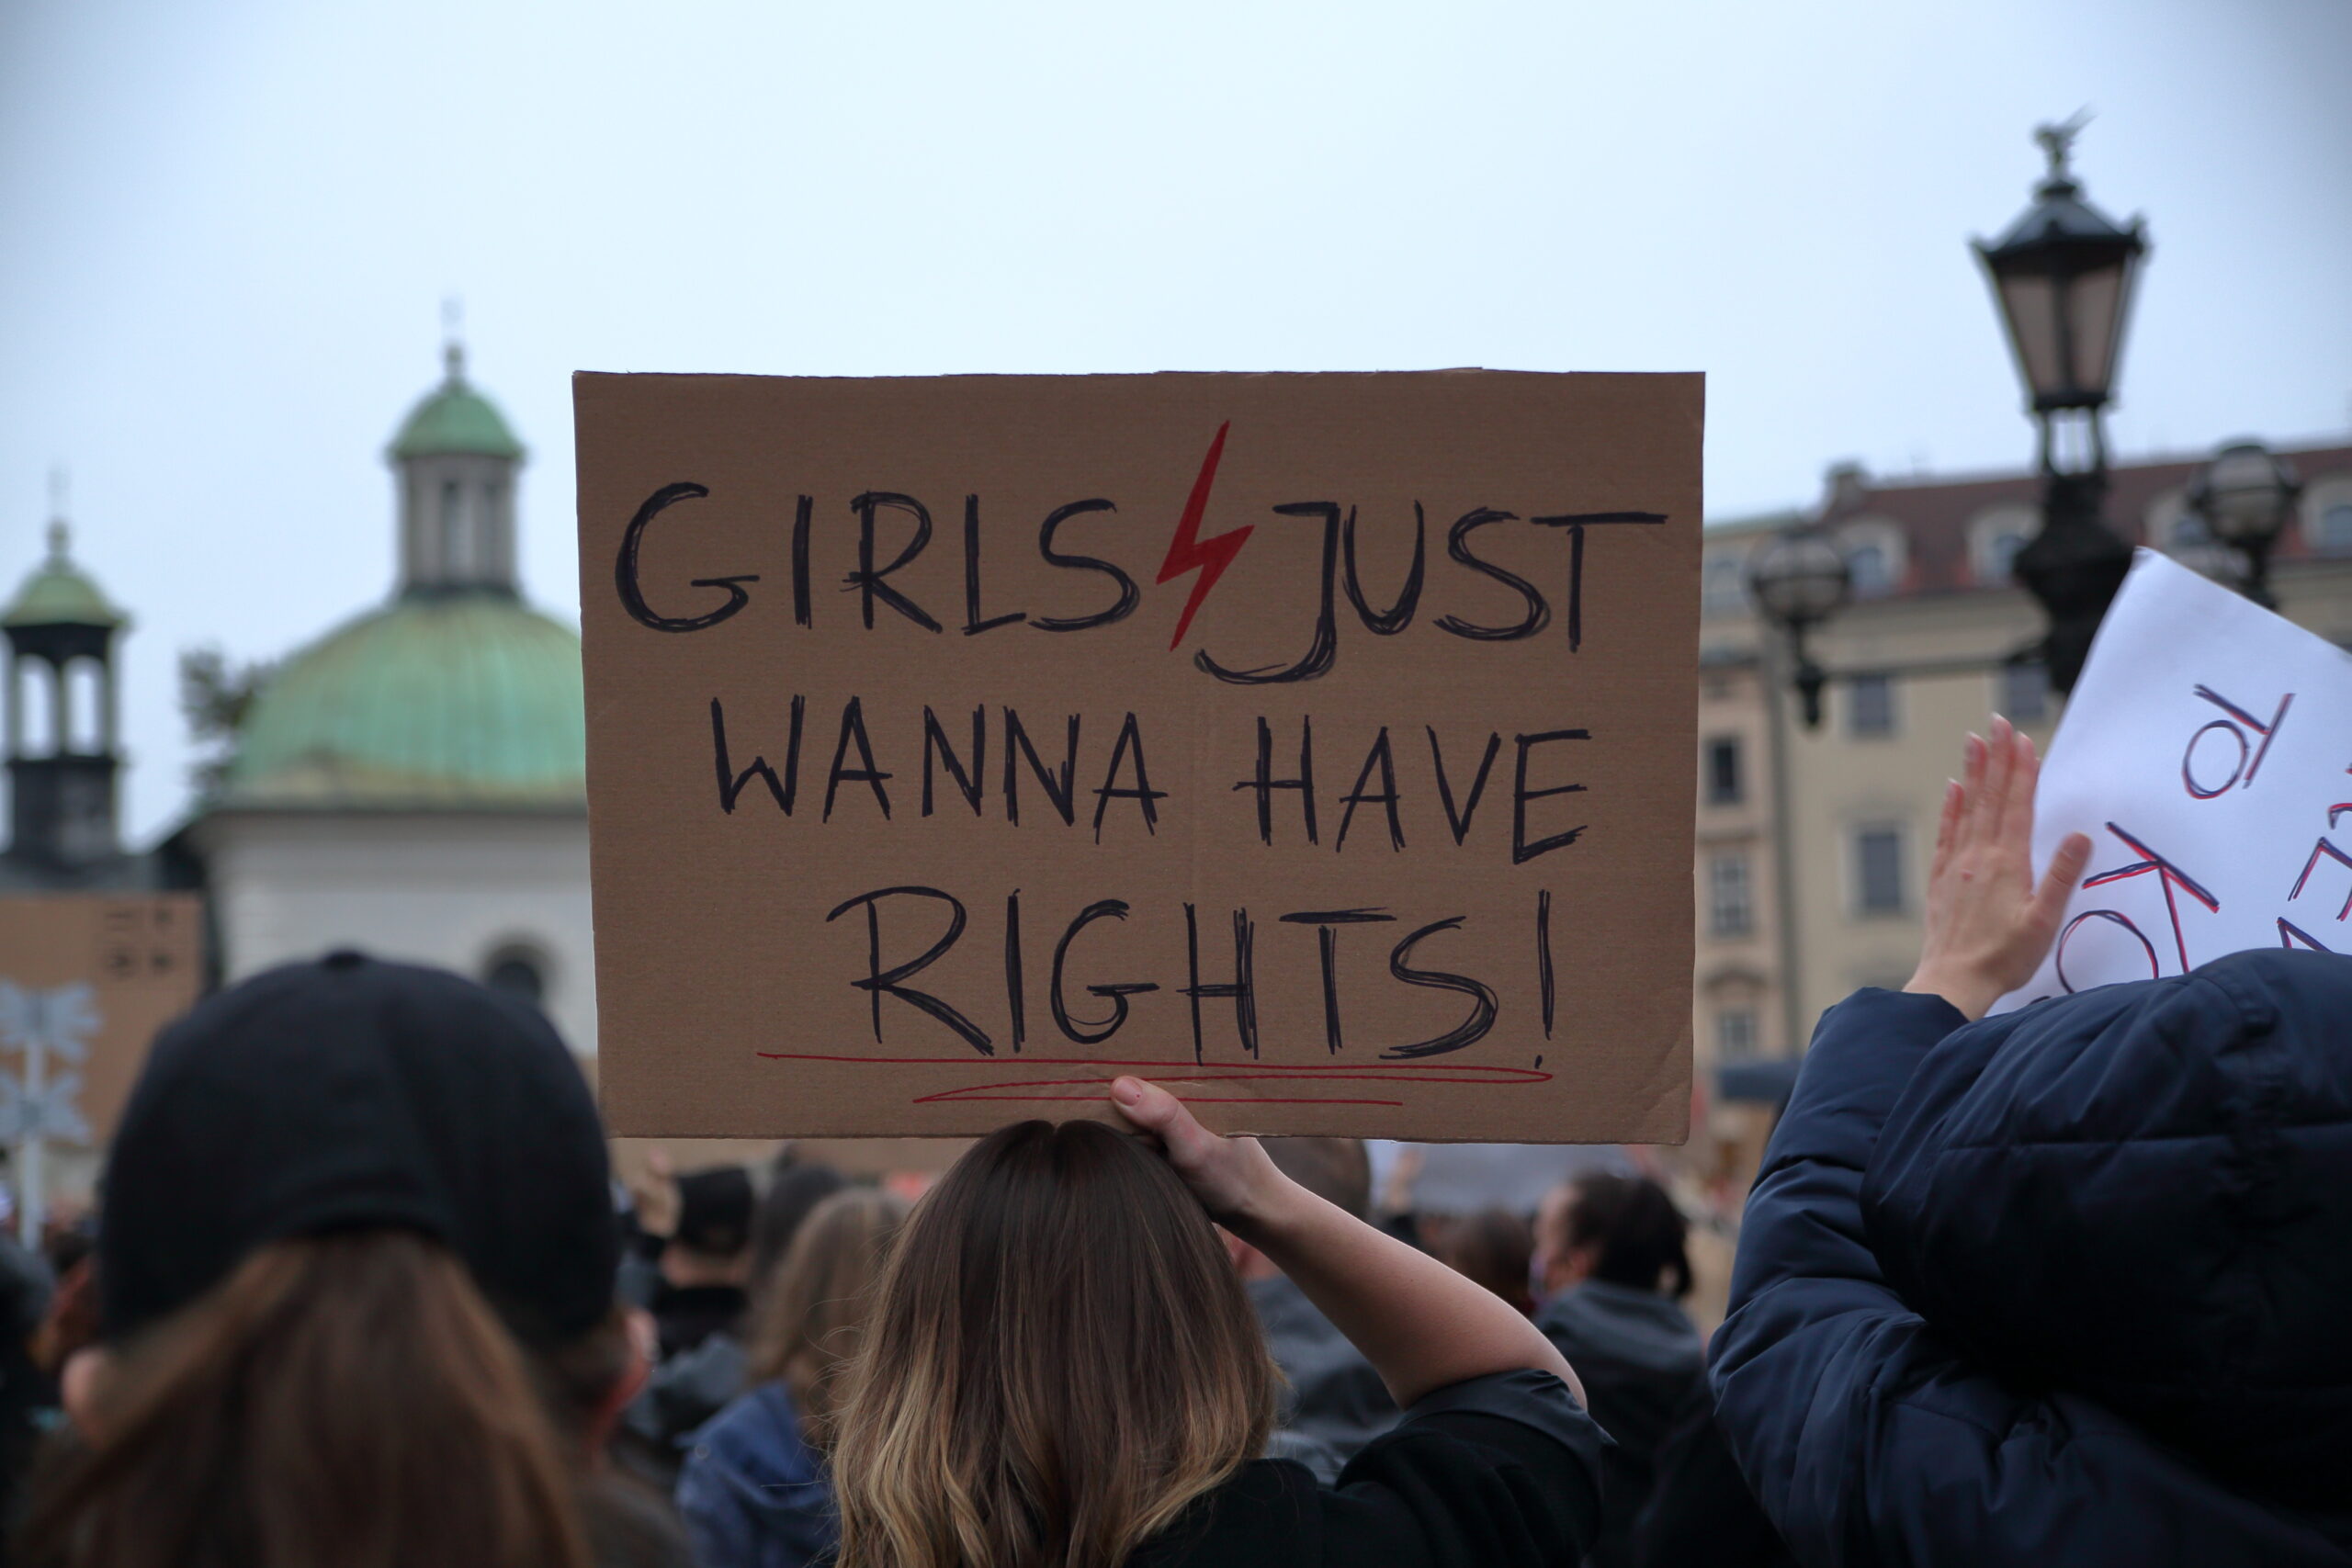 A cardboard protest sign is held up, the sign reads "girls just want to have rights"